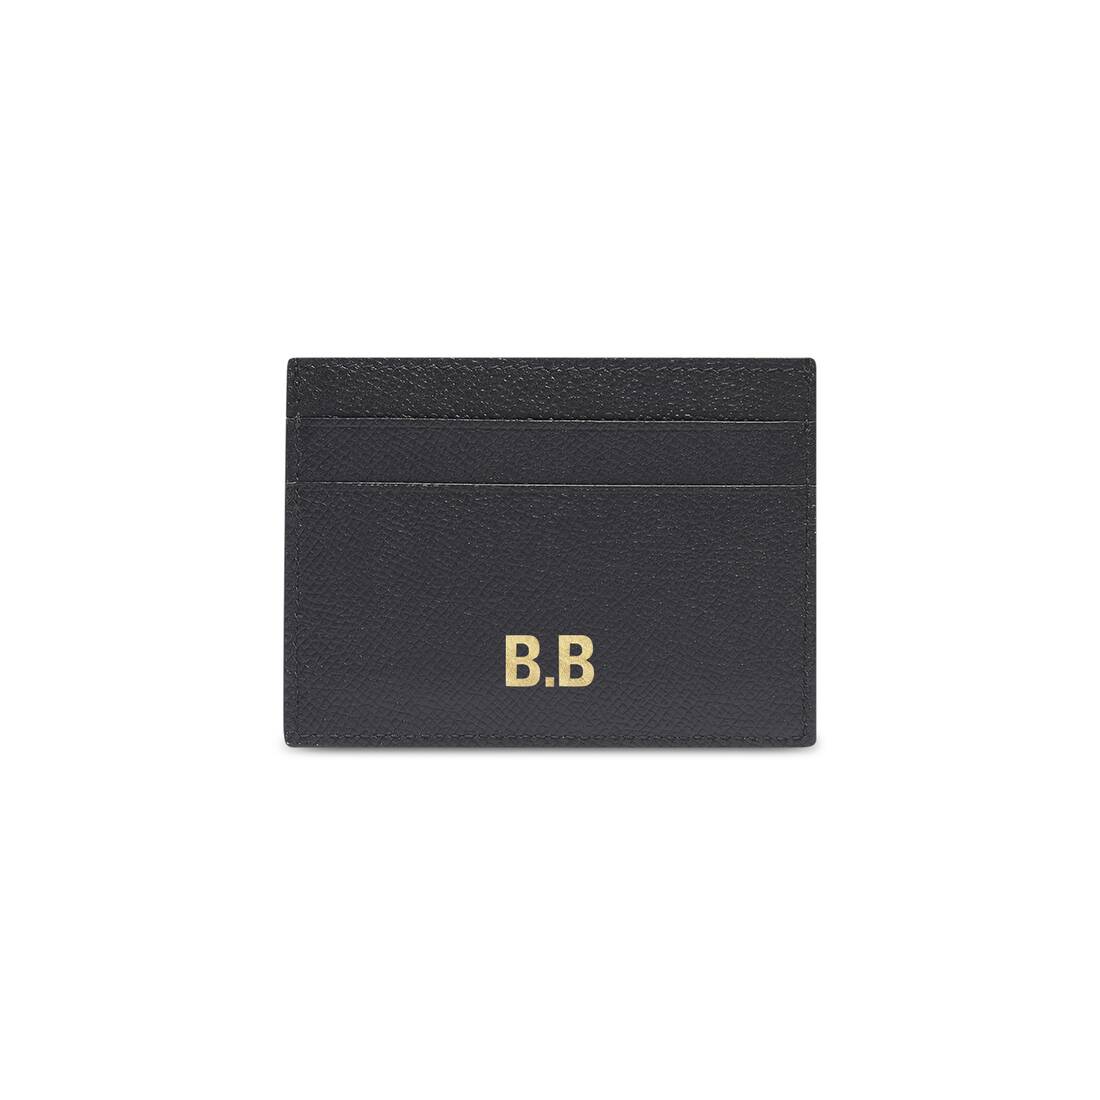 Balenciaga Business Card Holder 505238 Black Leather with Box Free Shipping